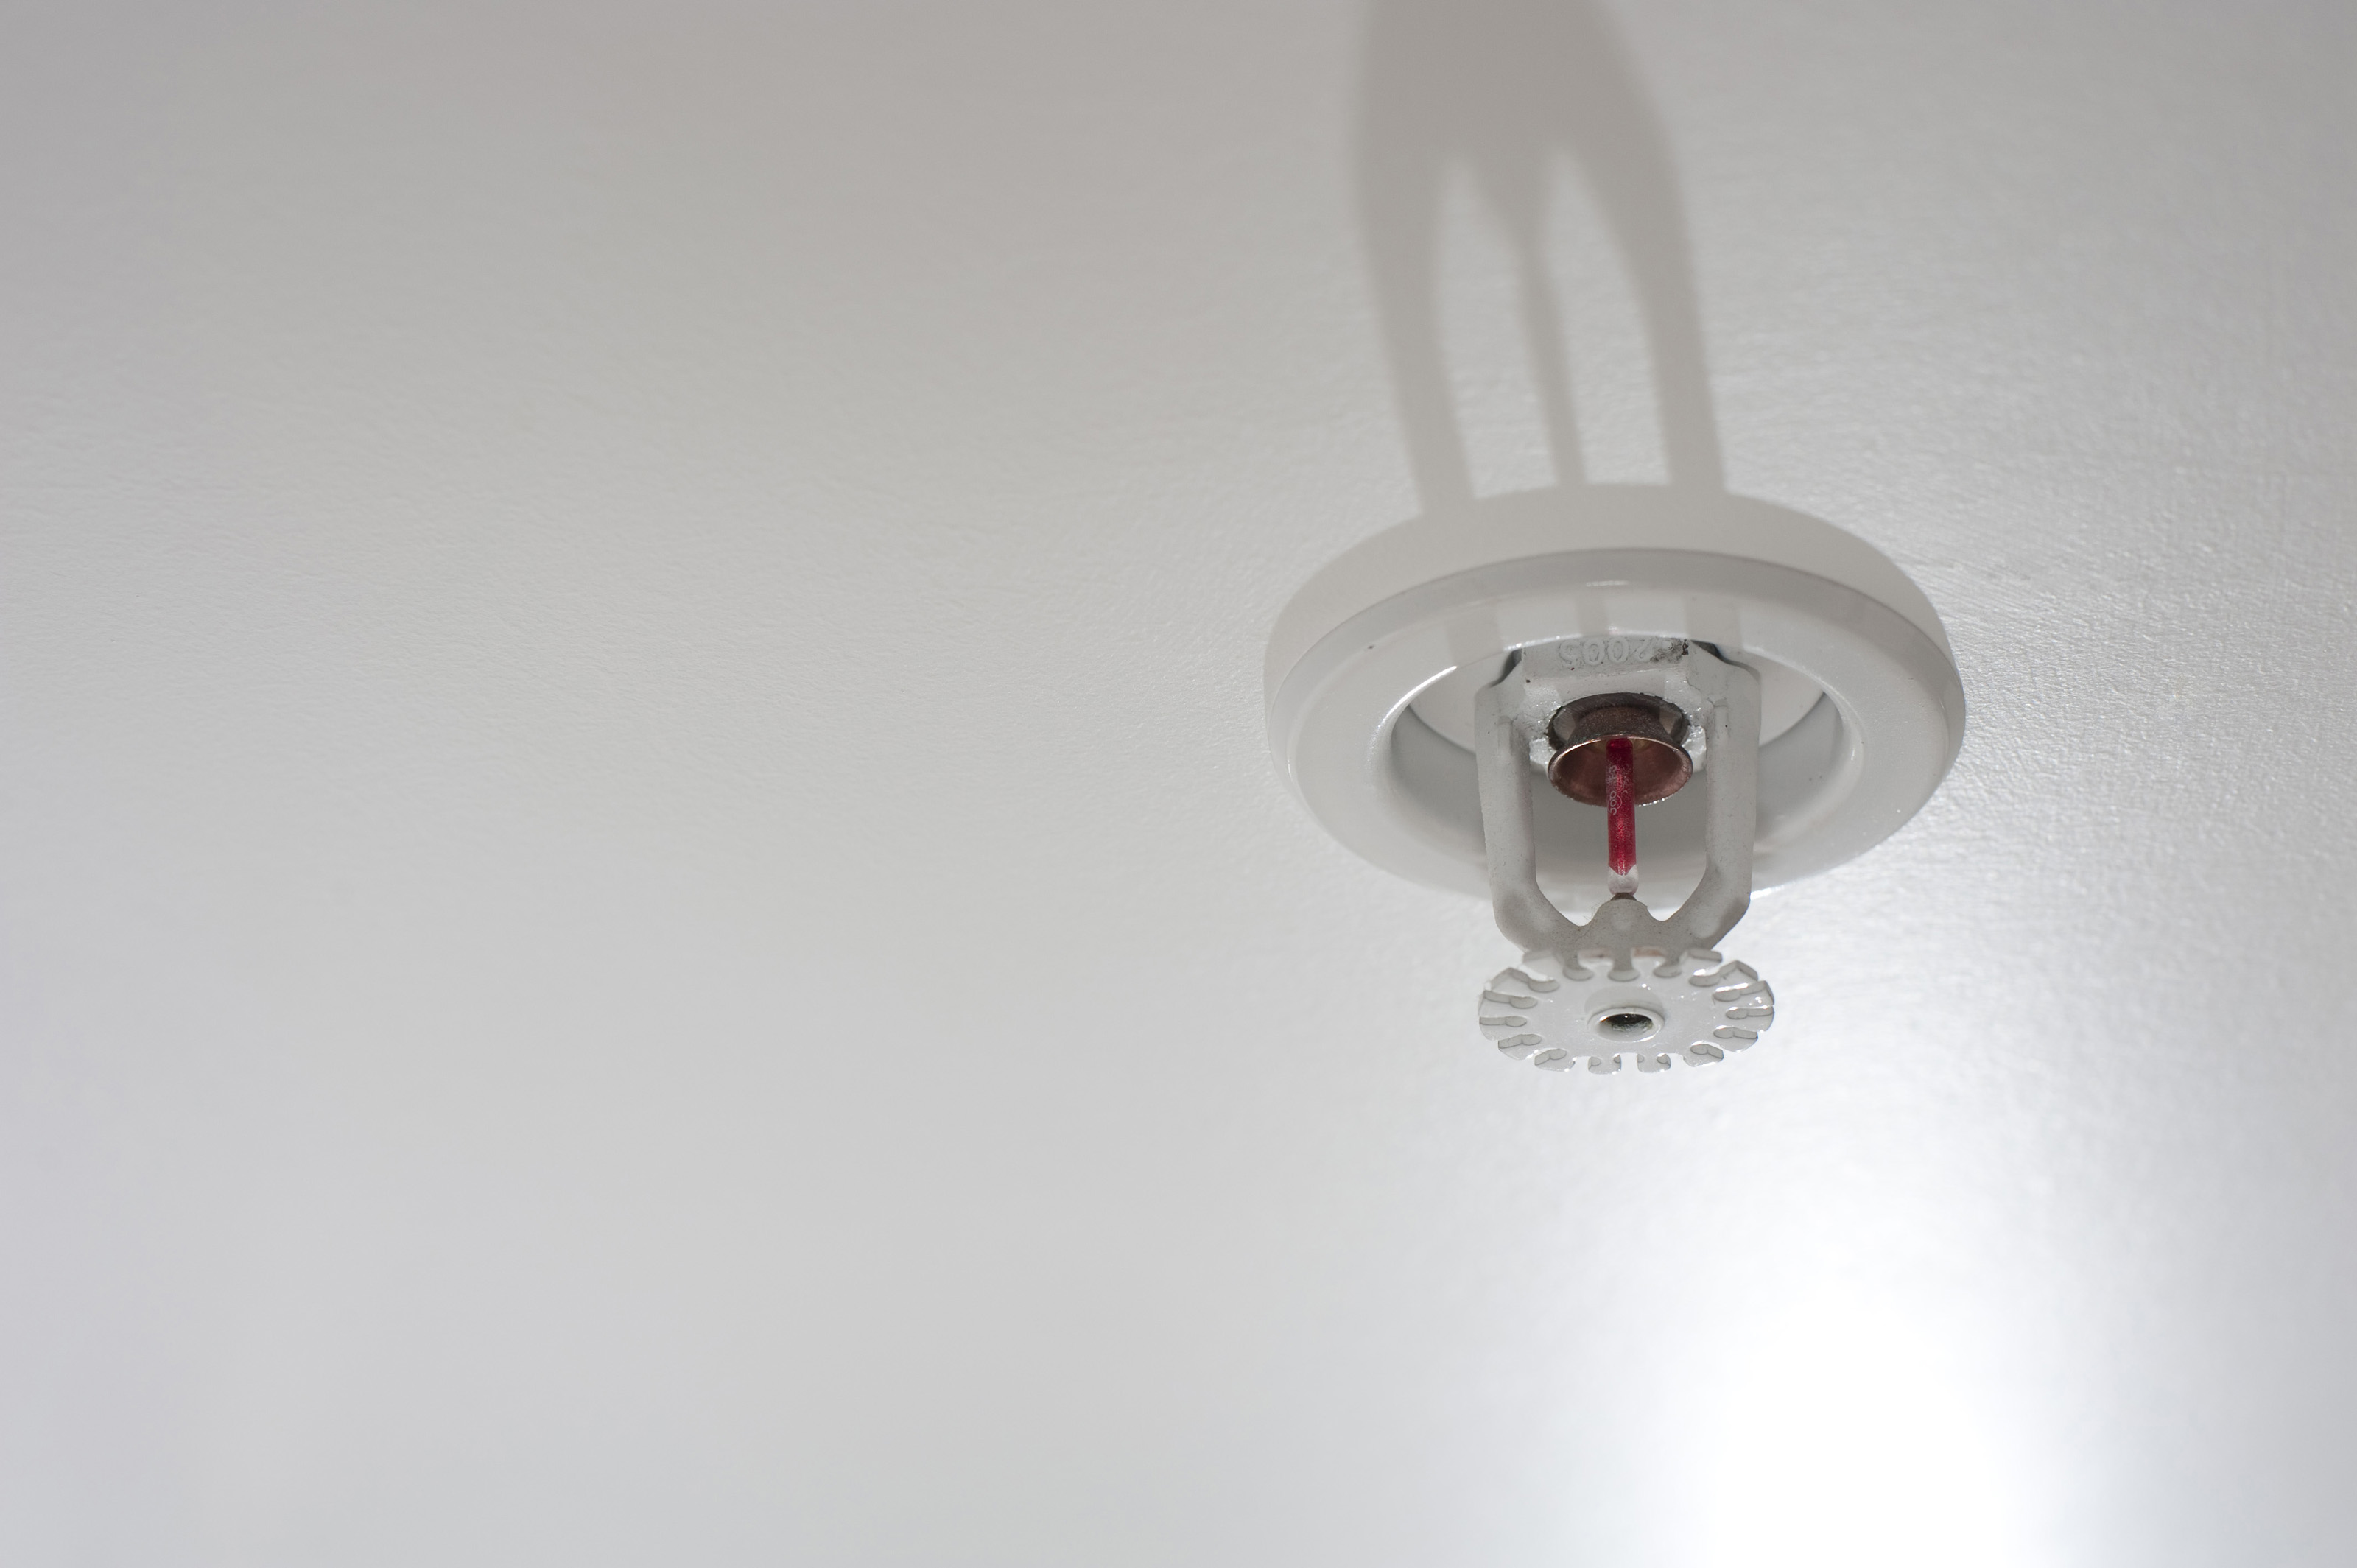 Free image of Overhead domestic fire sprinkler system